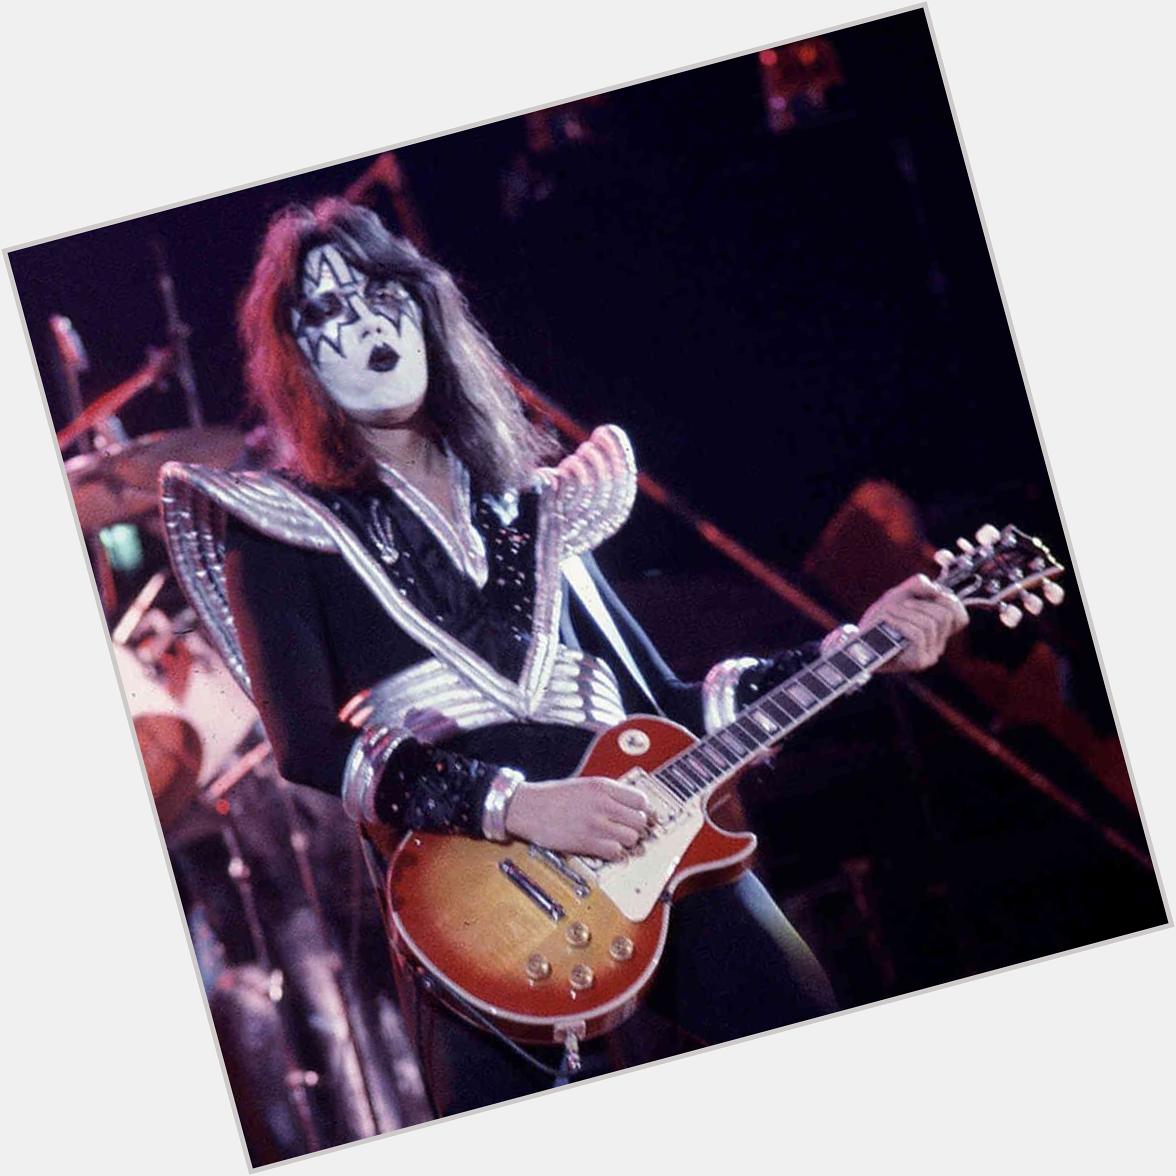 Happy 63rd Birthday Ace Frehley! The Space Ace of the hottest band in the world!  